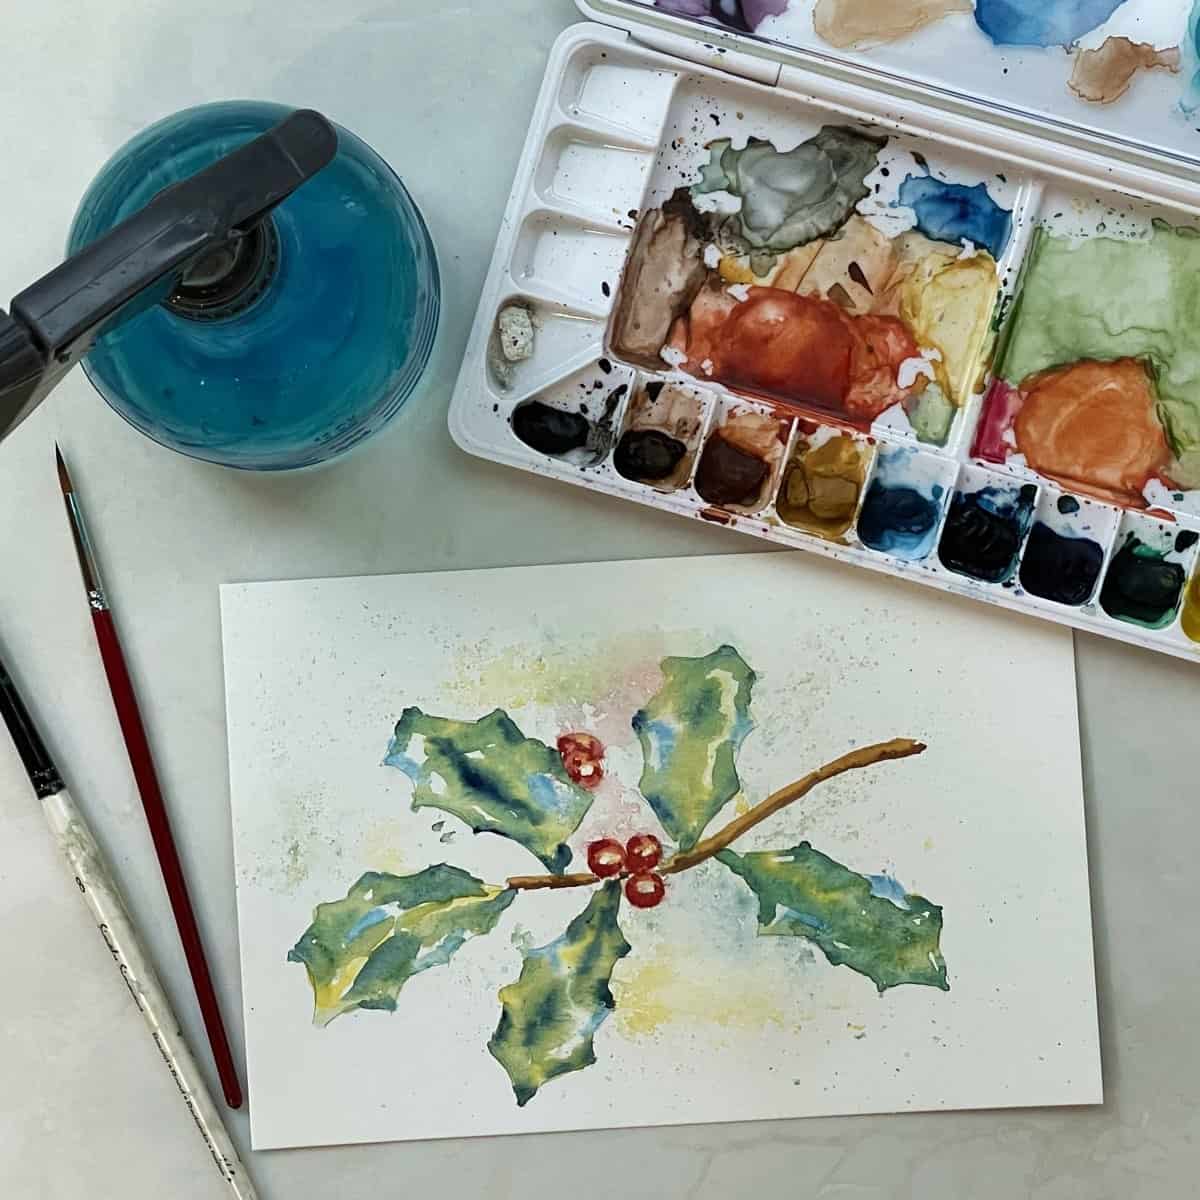 Watercolor painting of holly leaves and berries with splatter effects next to paint brushes, a paint palette and a squirt bottle.